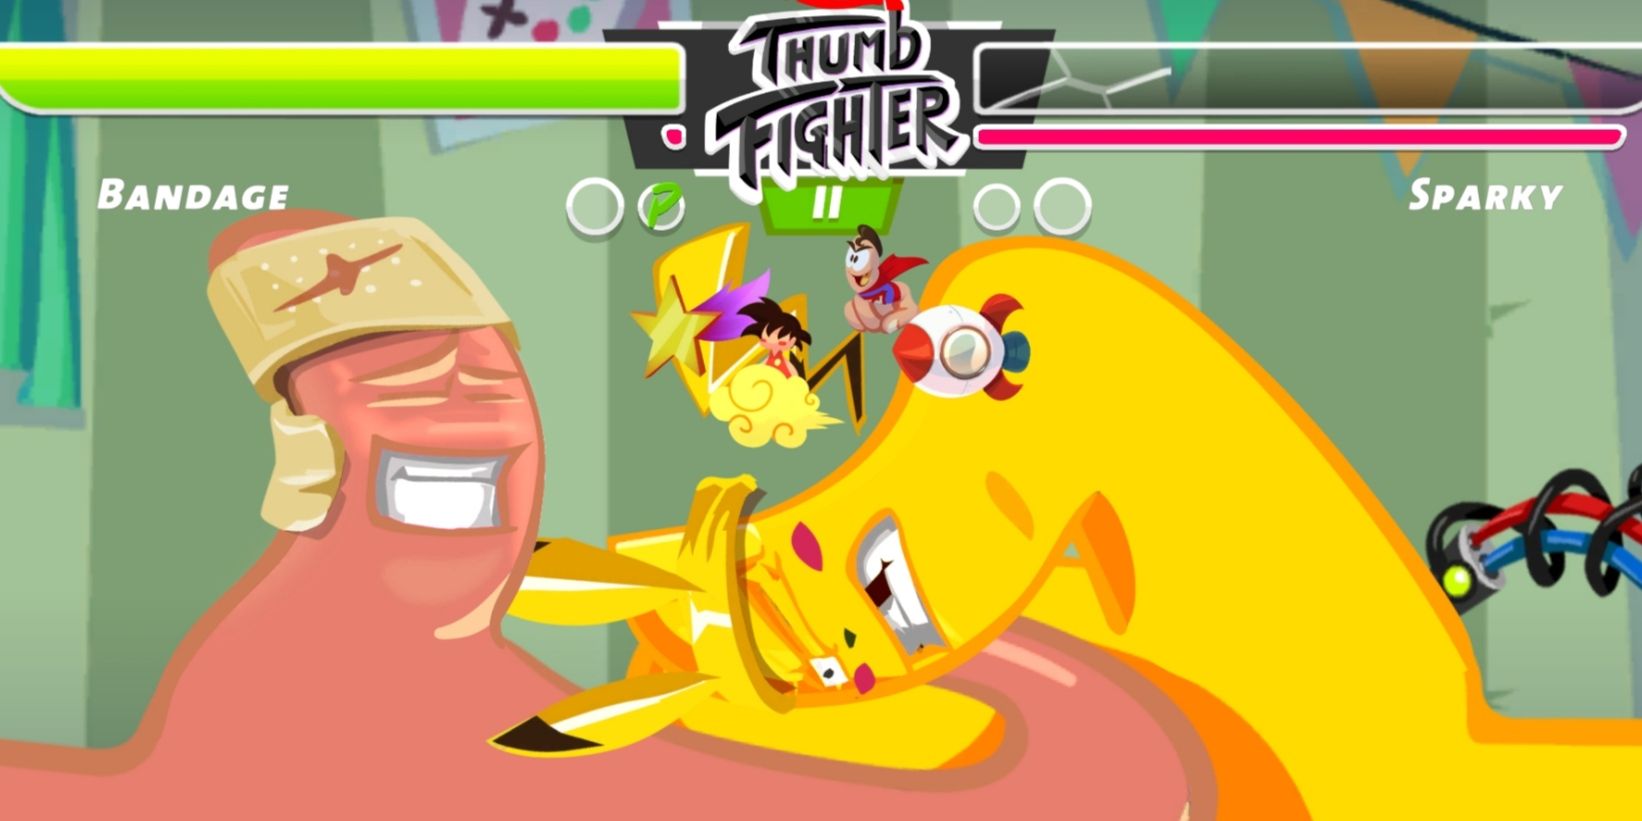 Bandage defeats Sparky in a game of thumb of war (from Thumb Fighter)